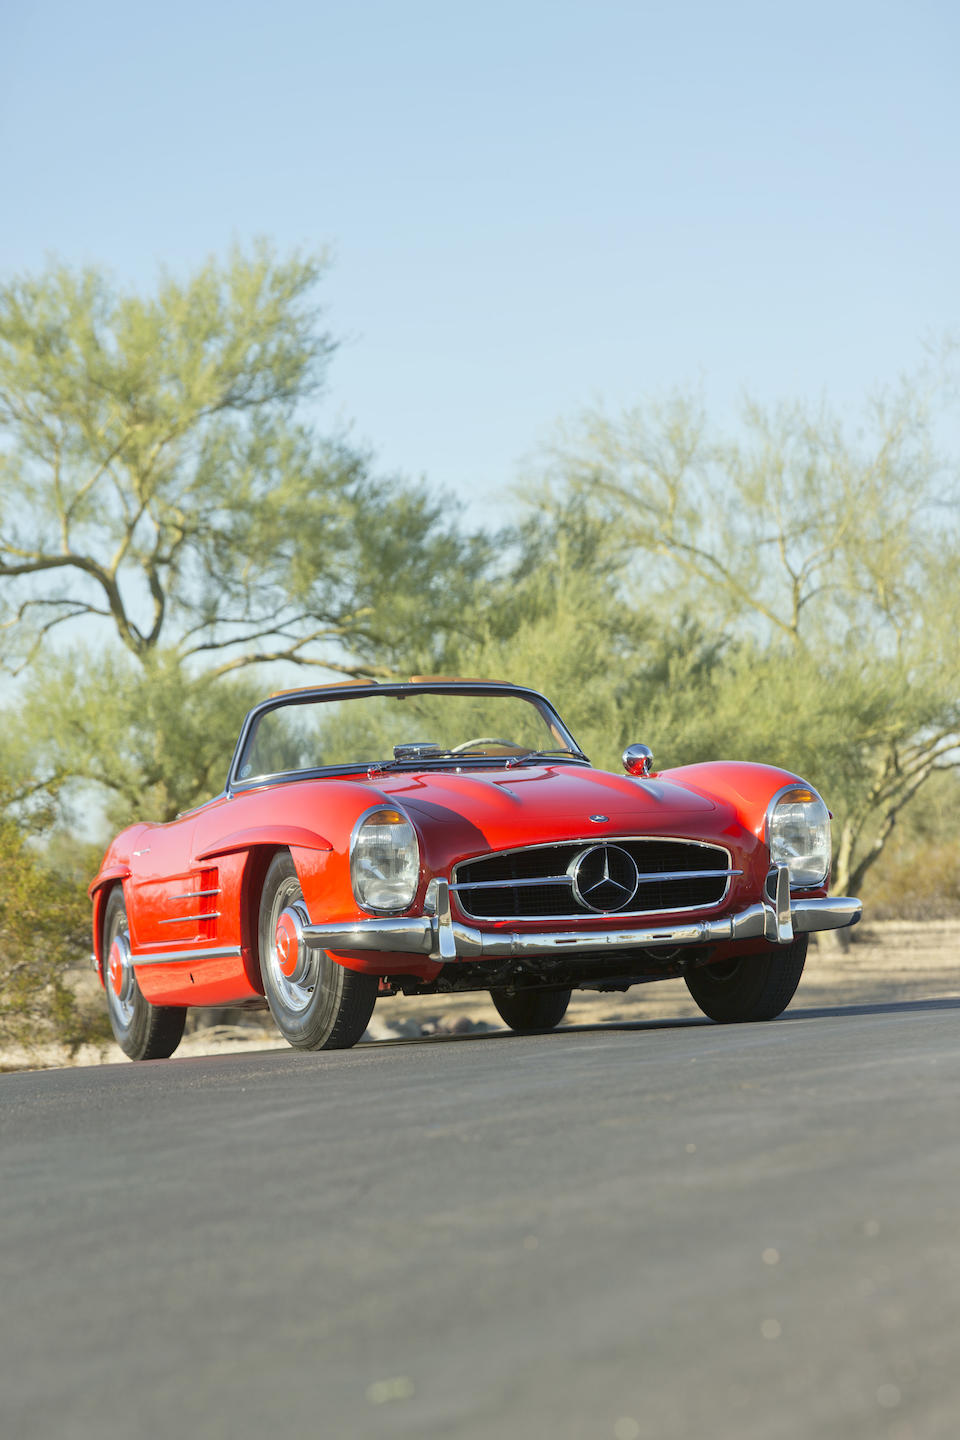 <b>1961 Mercedes-Benz 300SL Roadster with Hardtop</b>  <br />Chassis no. 198042-10-002795 <br />Engine no. 198980-10-002846